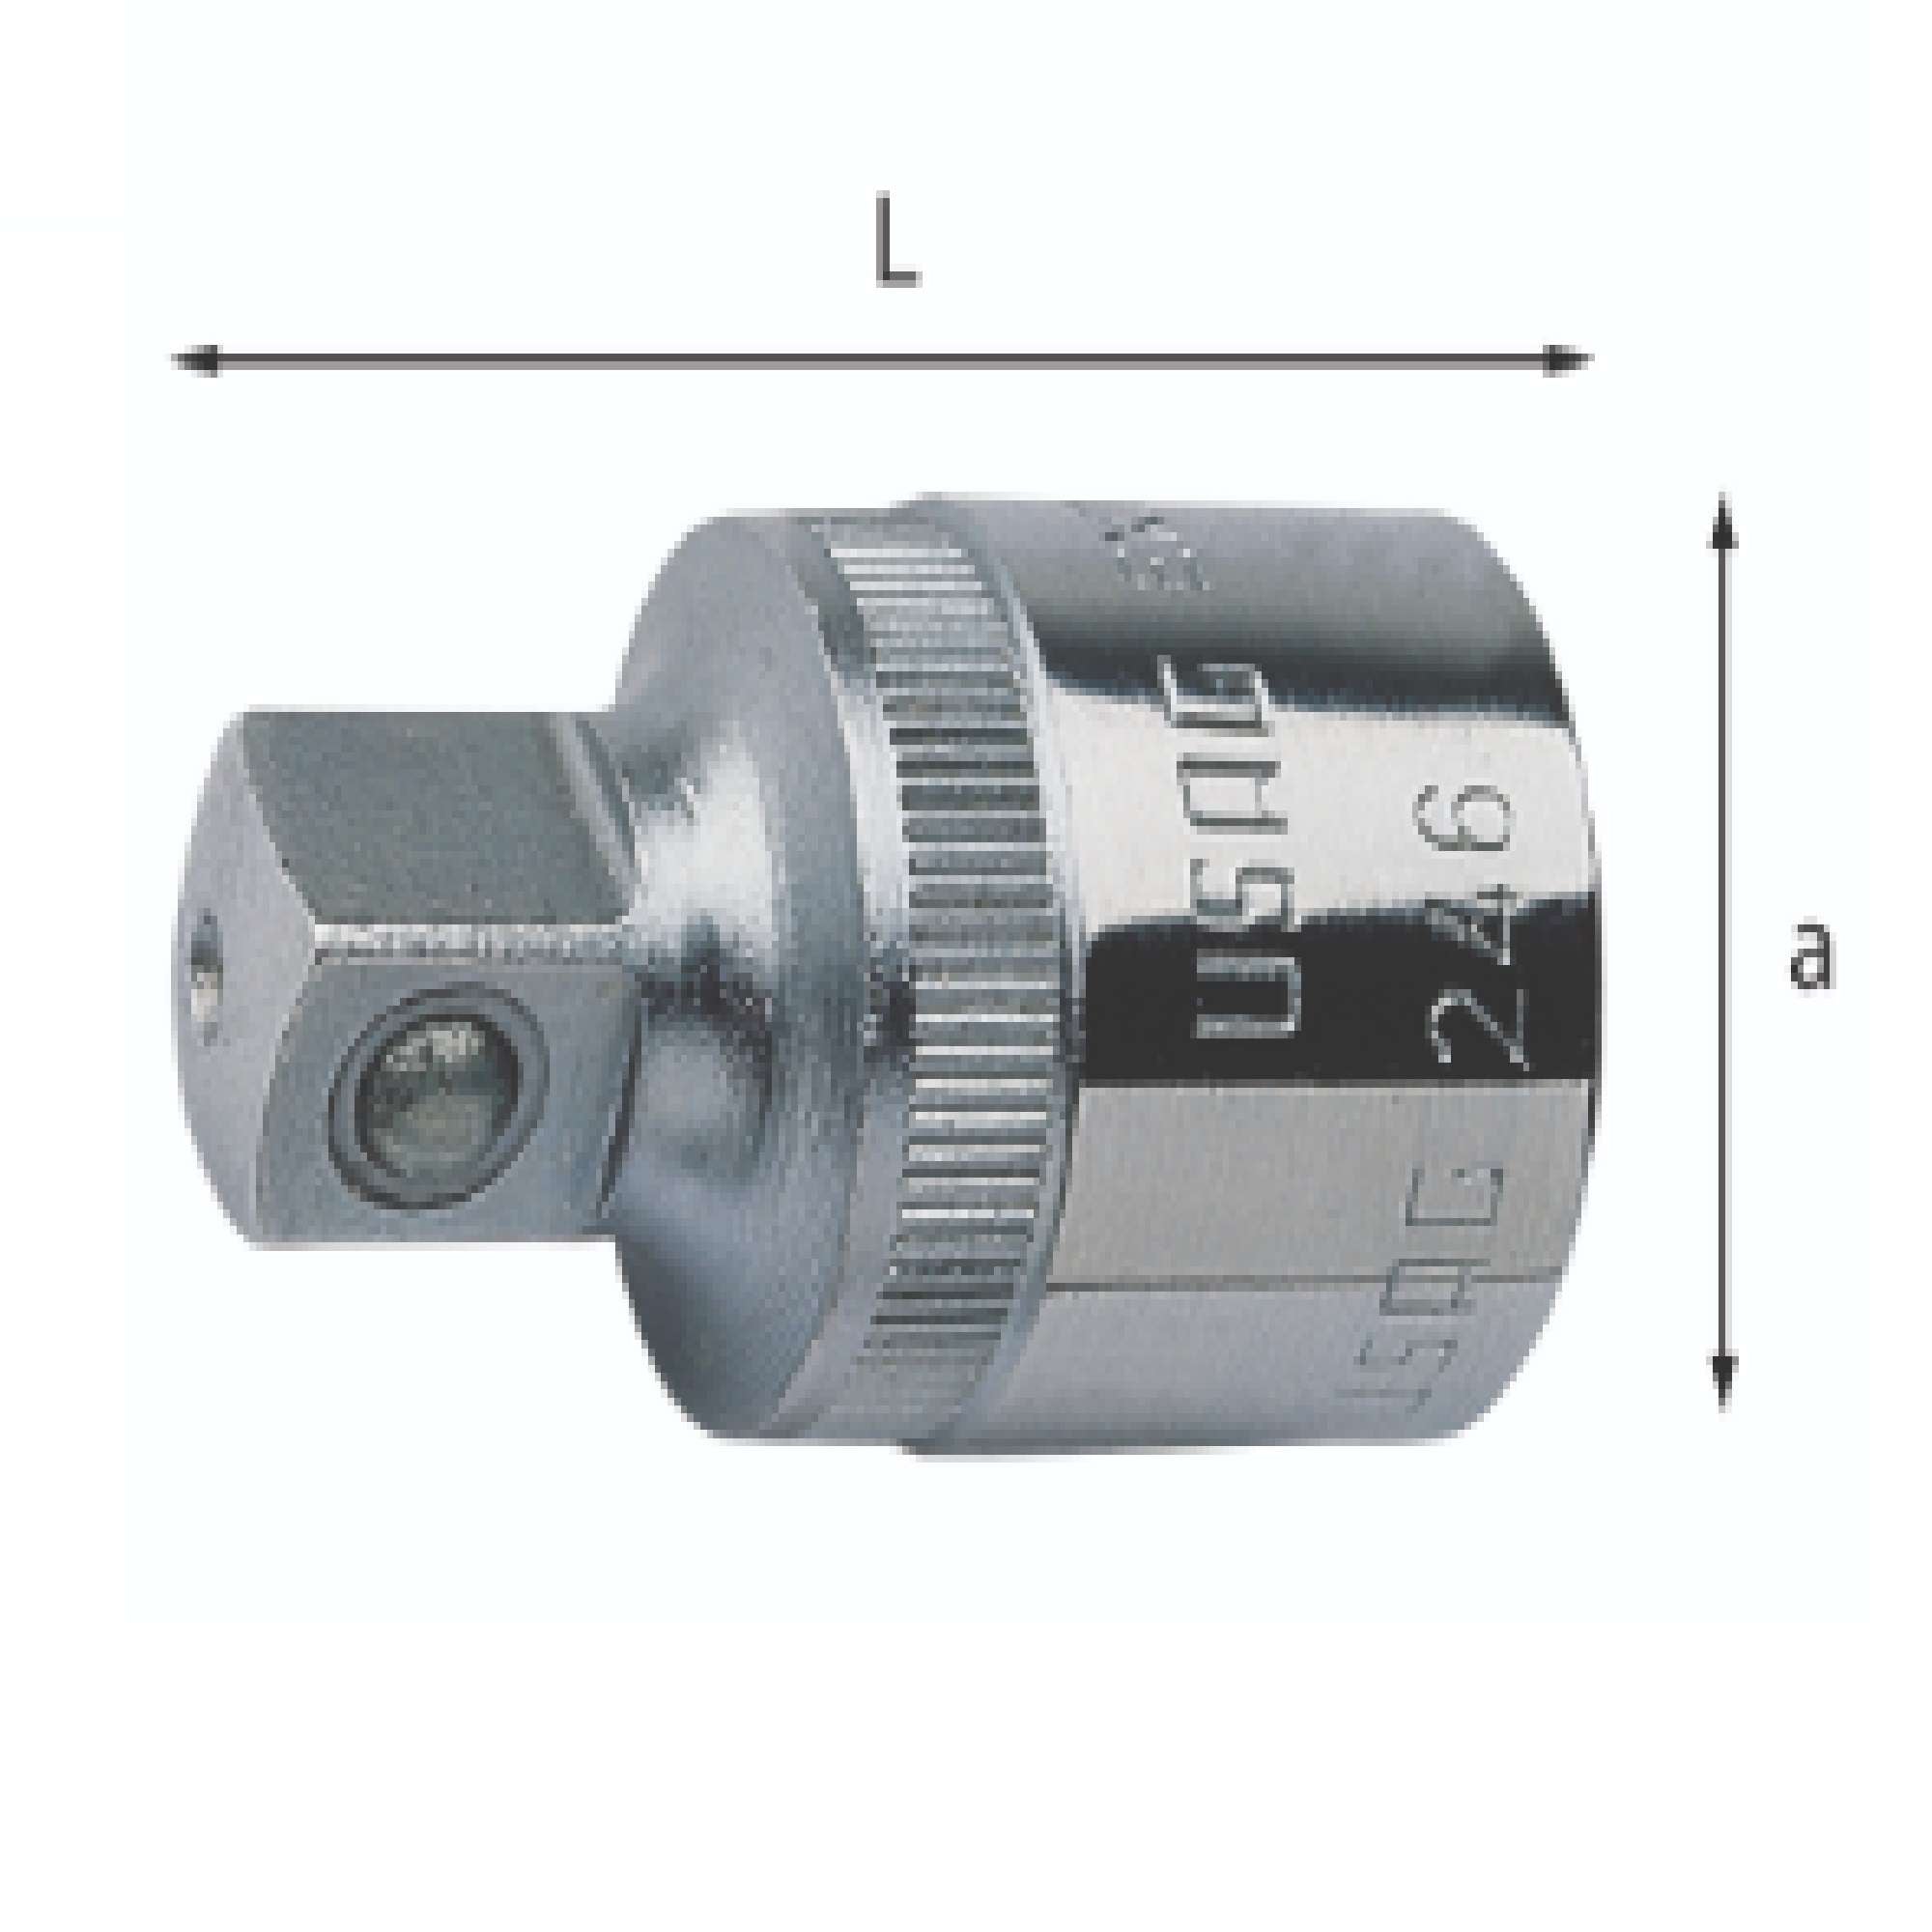 Adapter 3/8" female square coupling, 1/4" male square coupling Usag 246 3/8